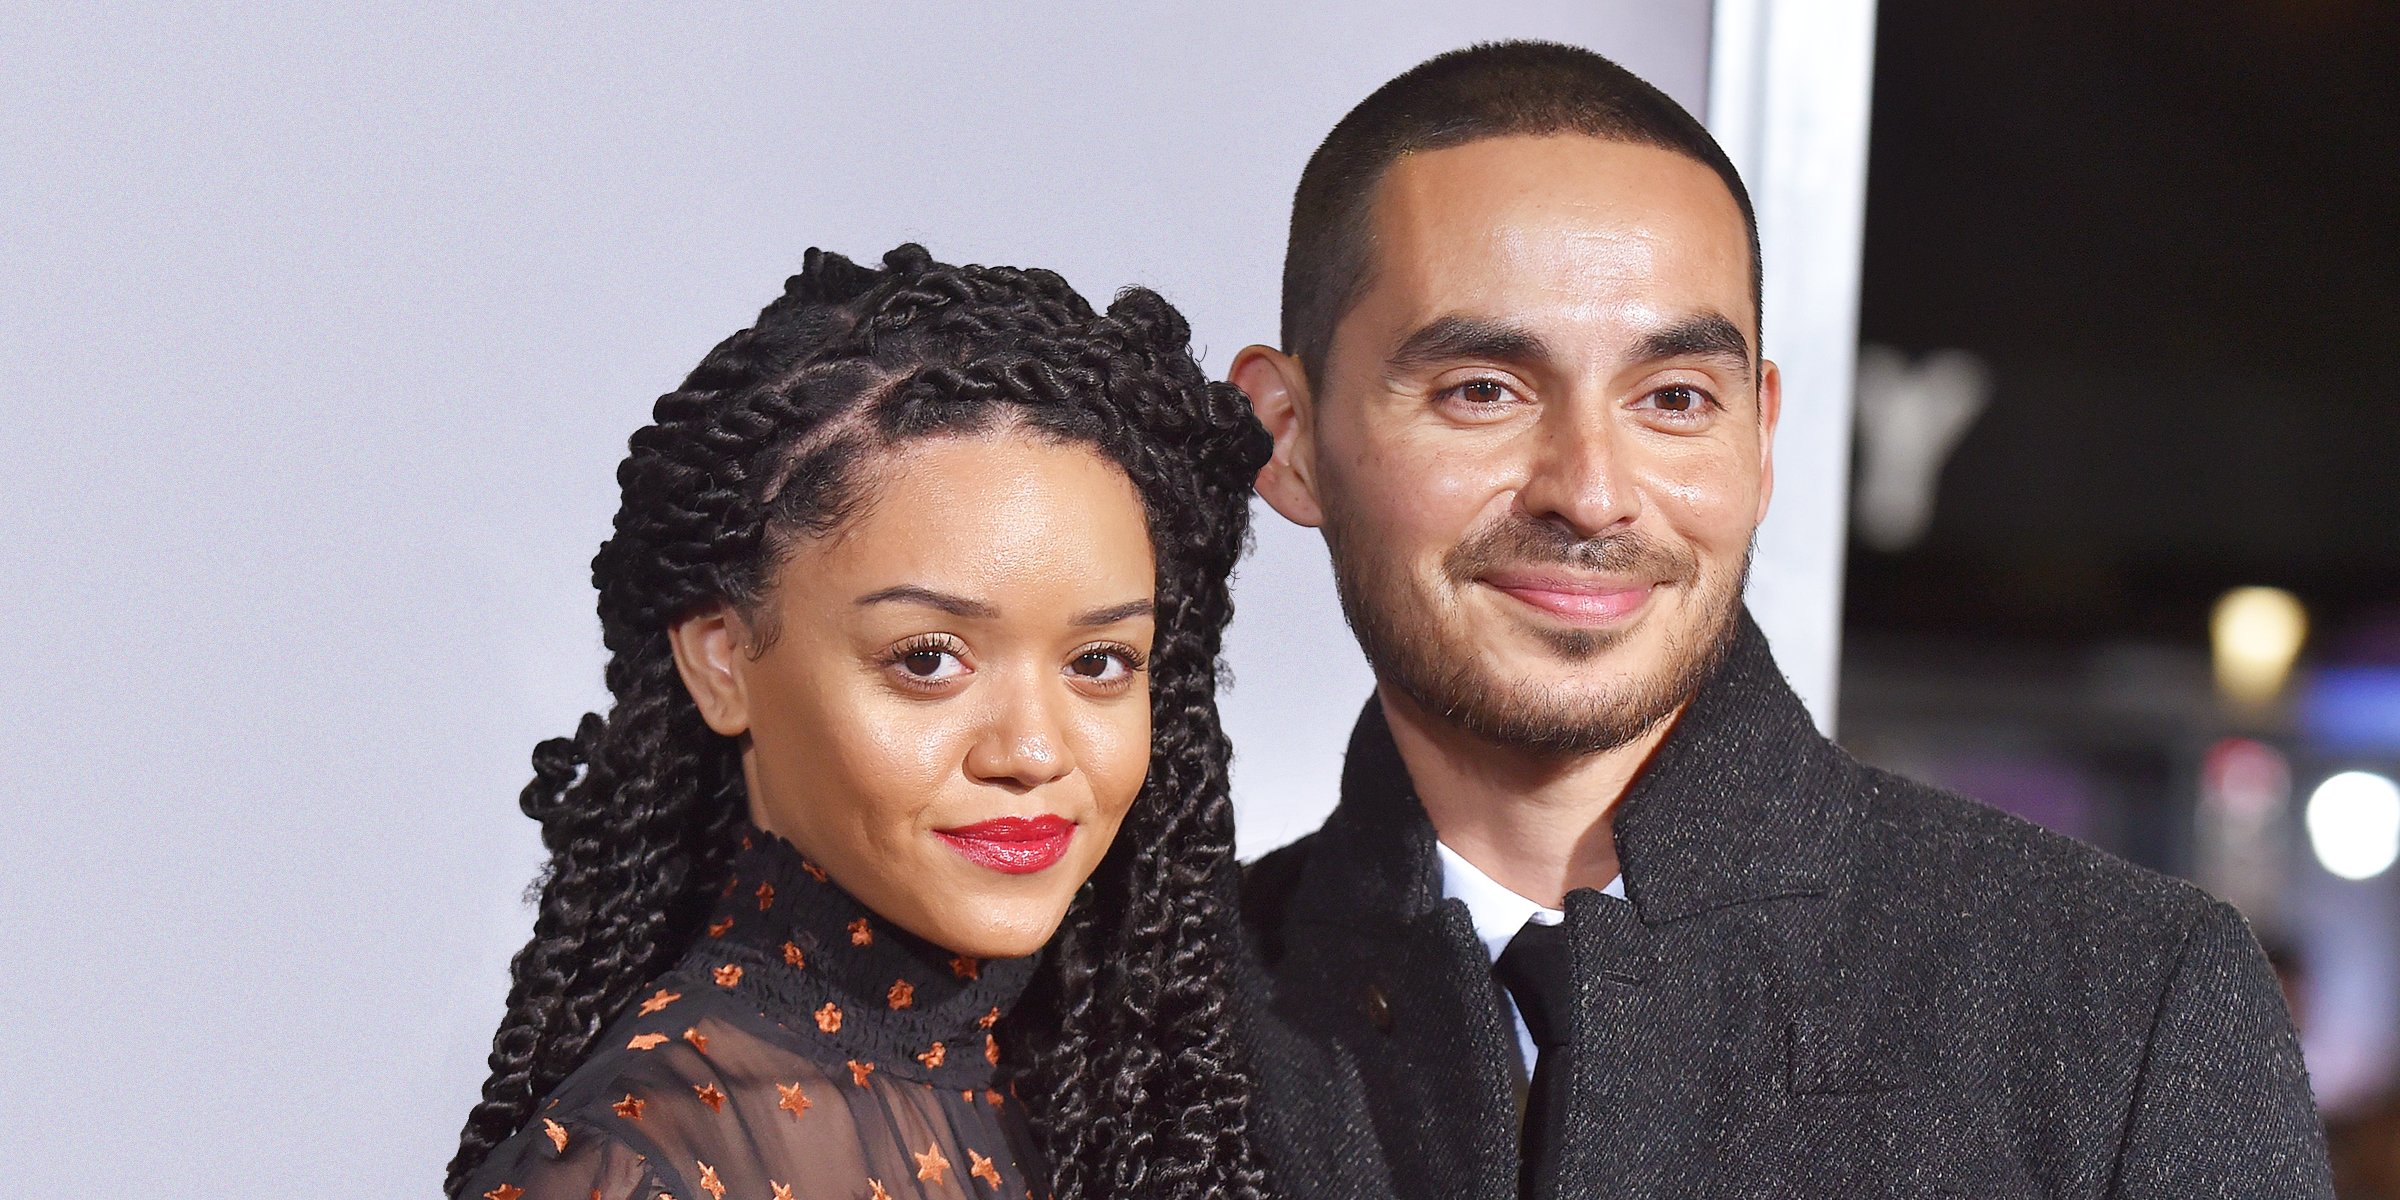 Adelfa Marr and Manny Montana | Source: Getty Images